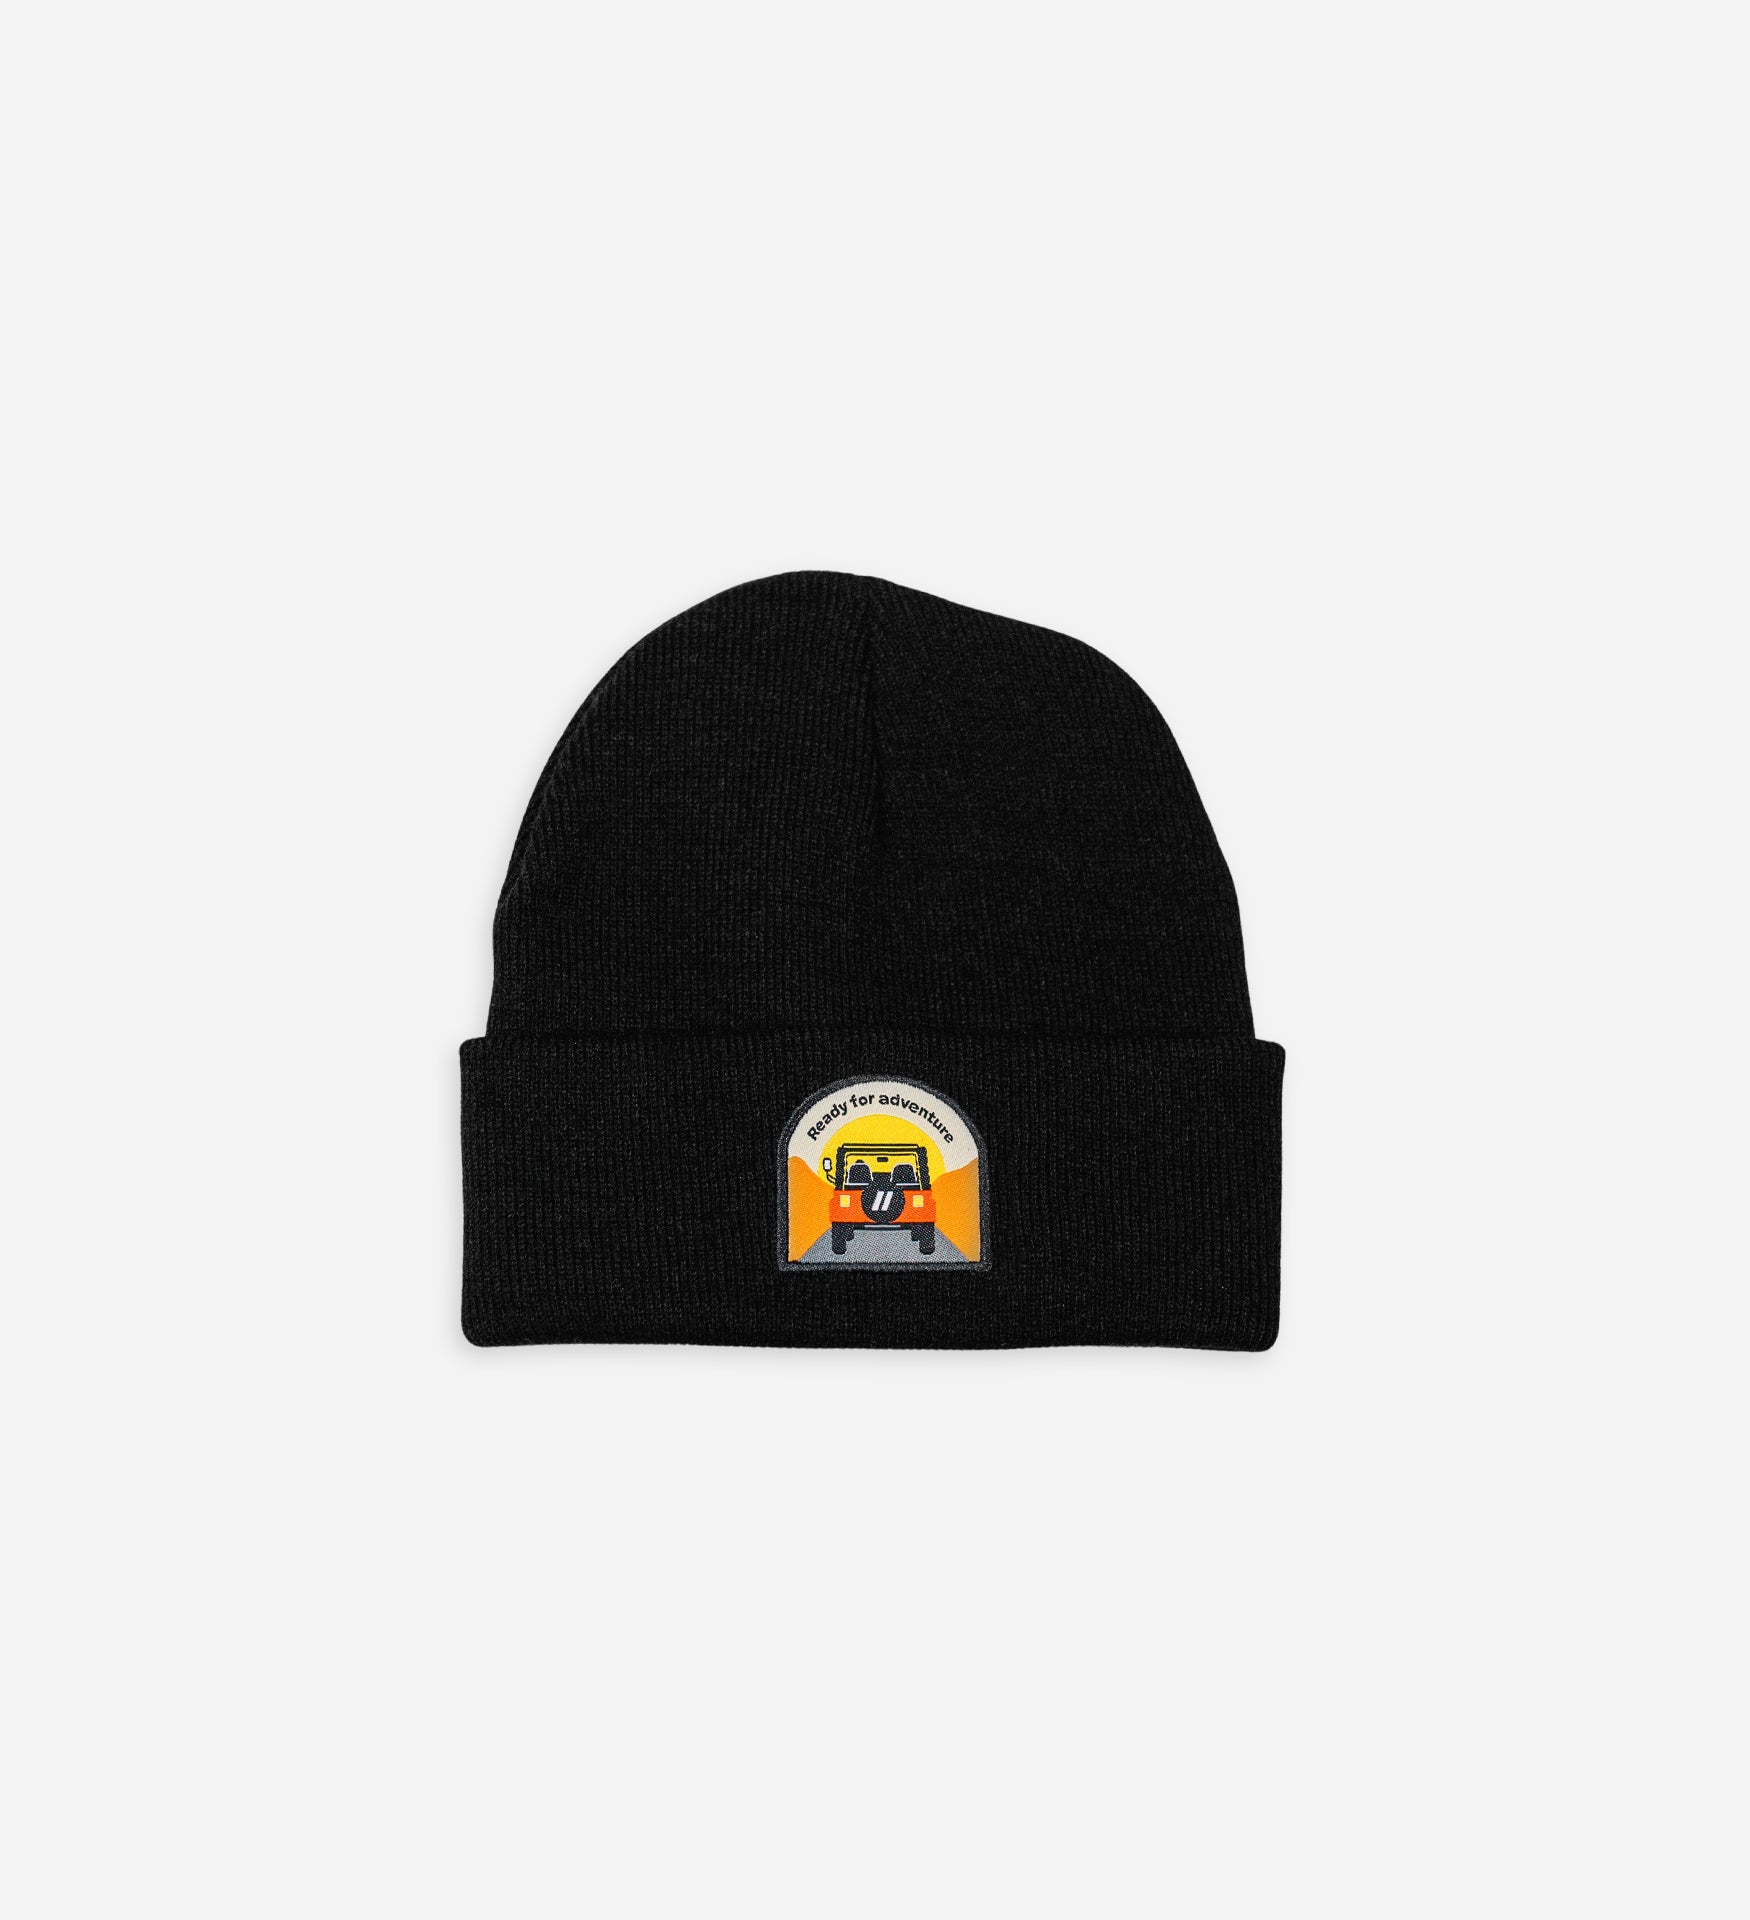 Youth Ready for Adventure Beanie